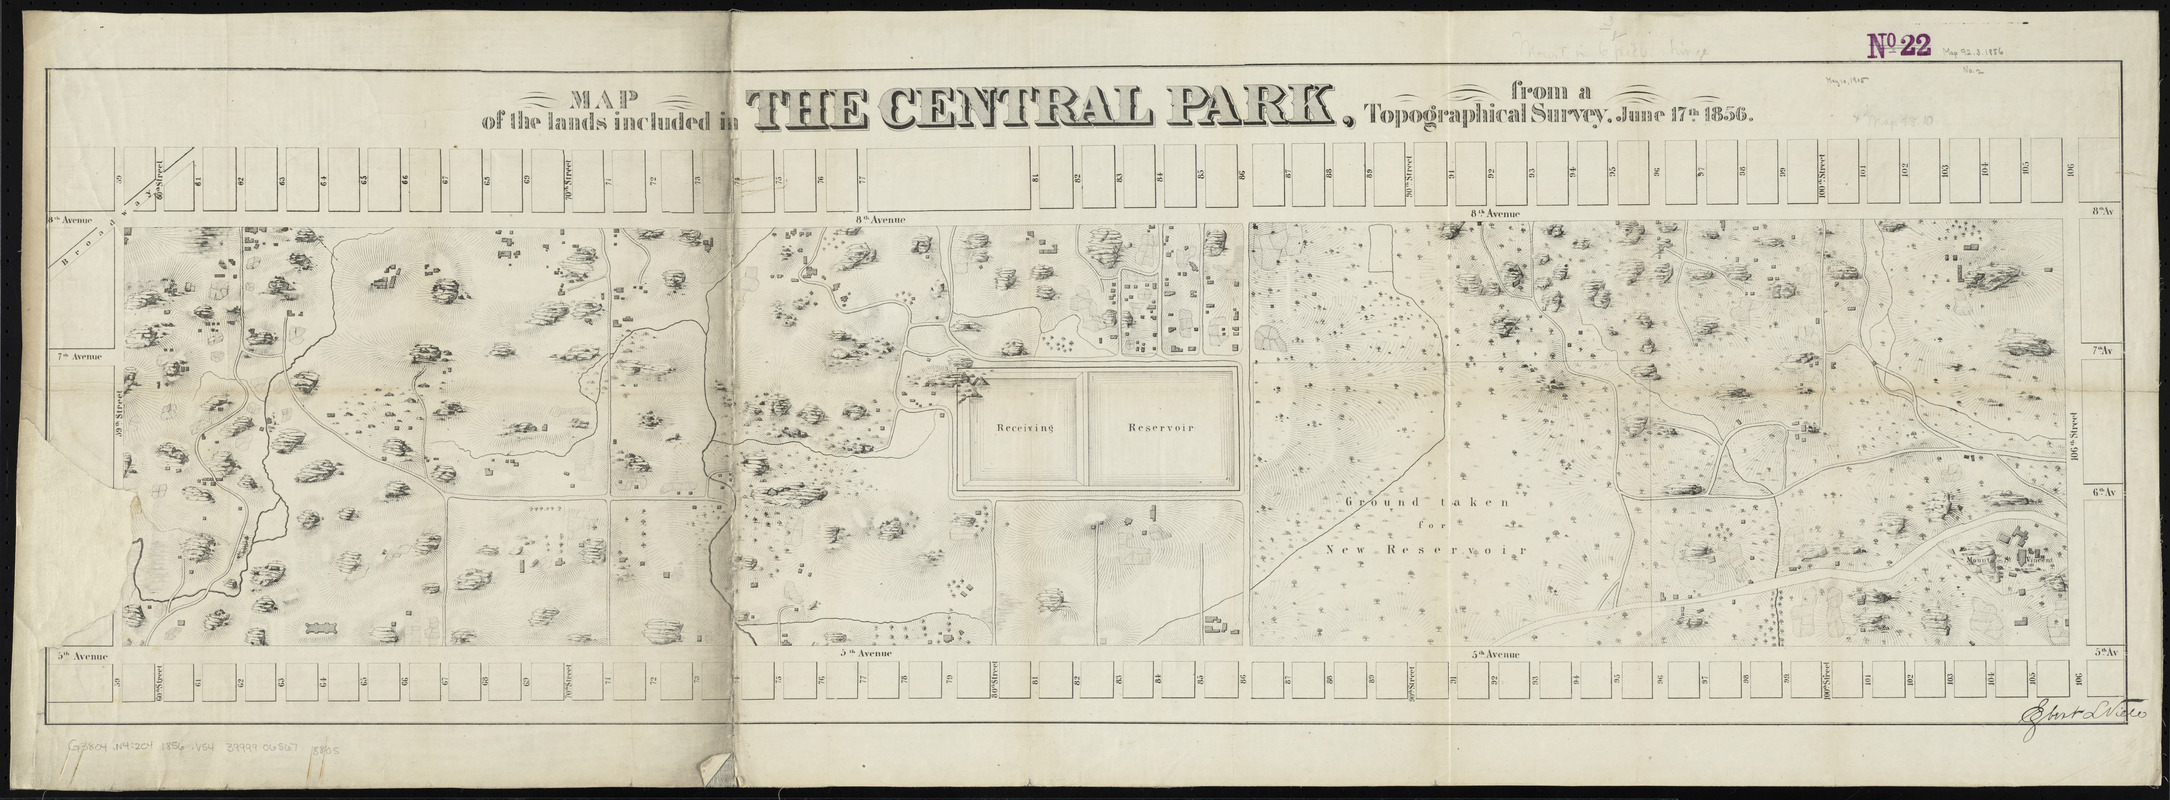 Map of the lands included in the Central Park, from a topographical survey, June 17th, 1856